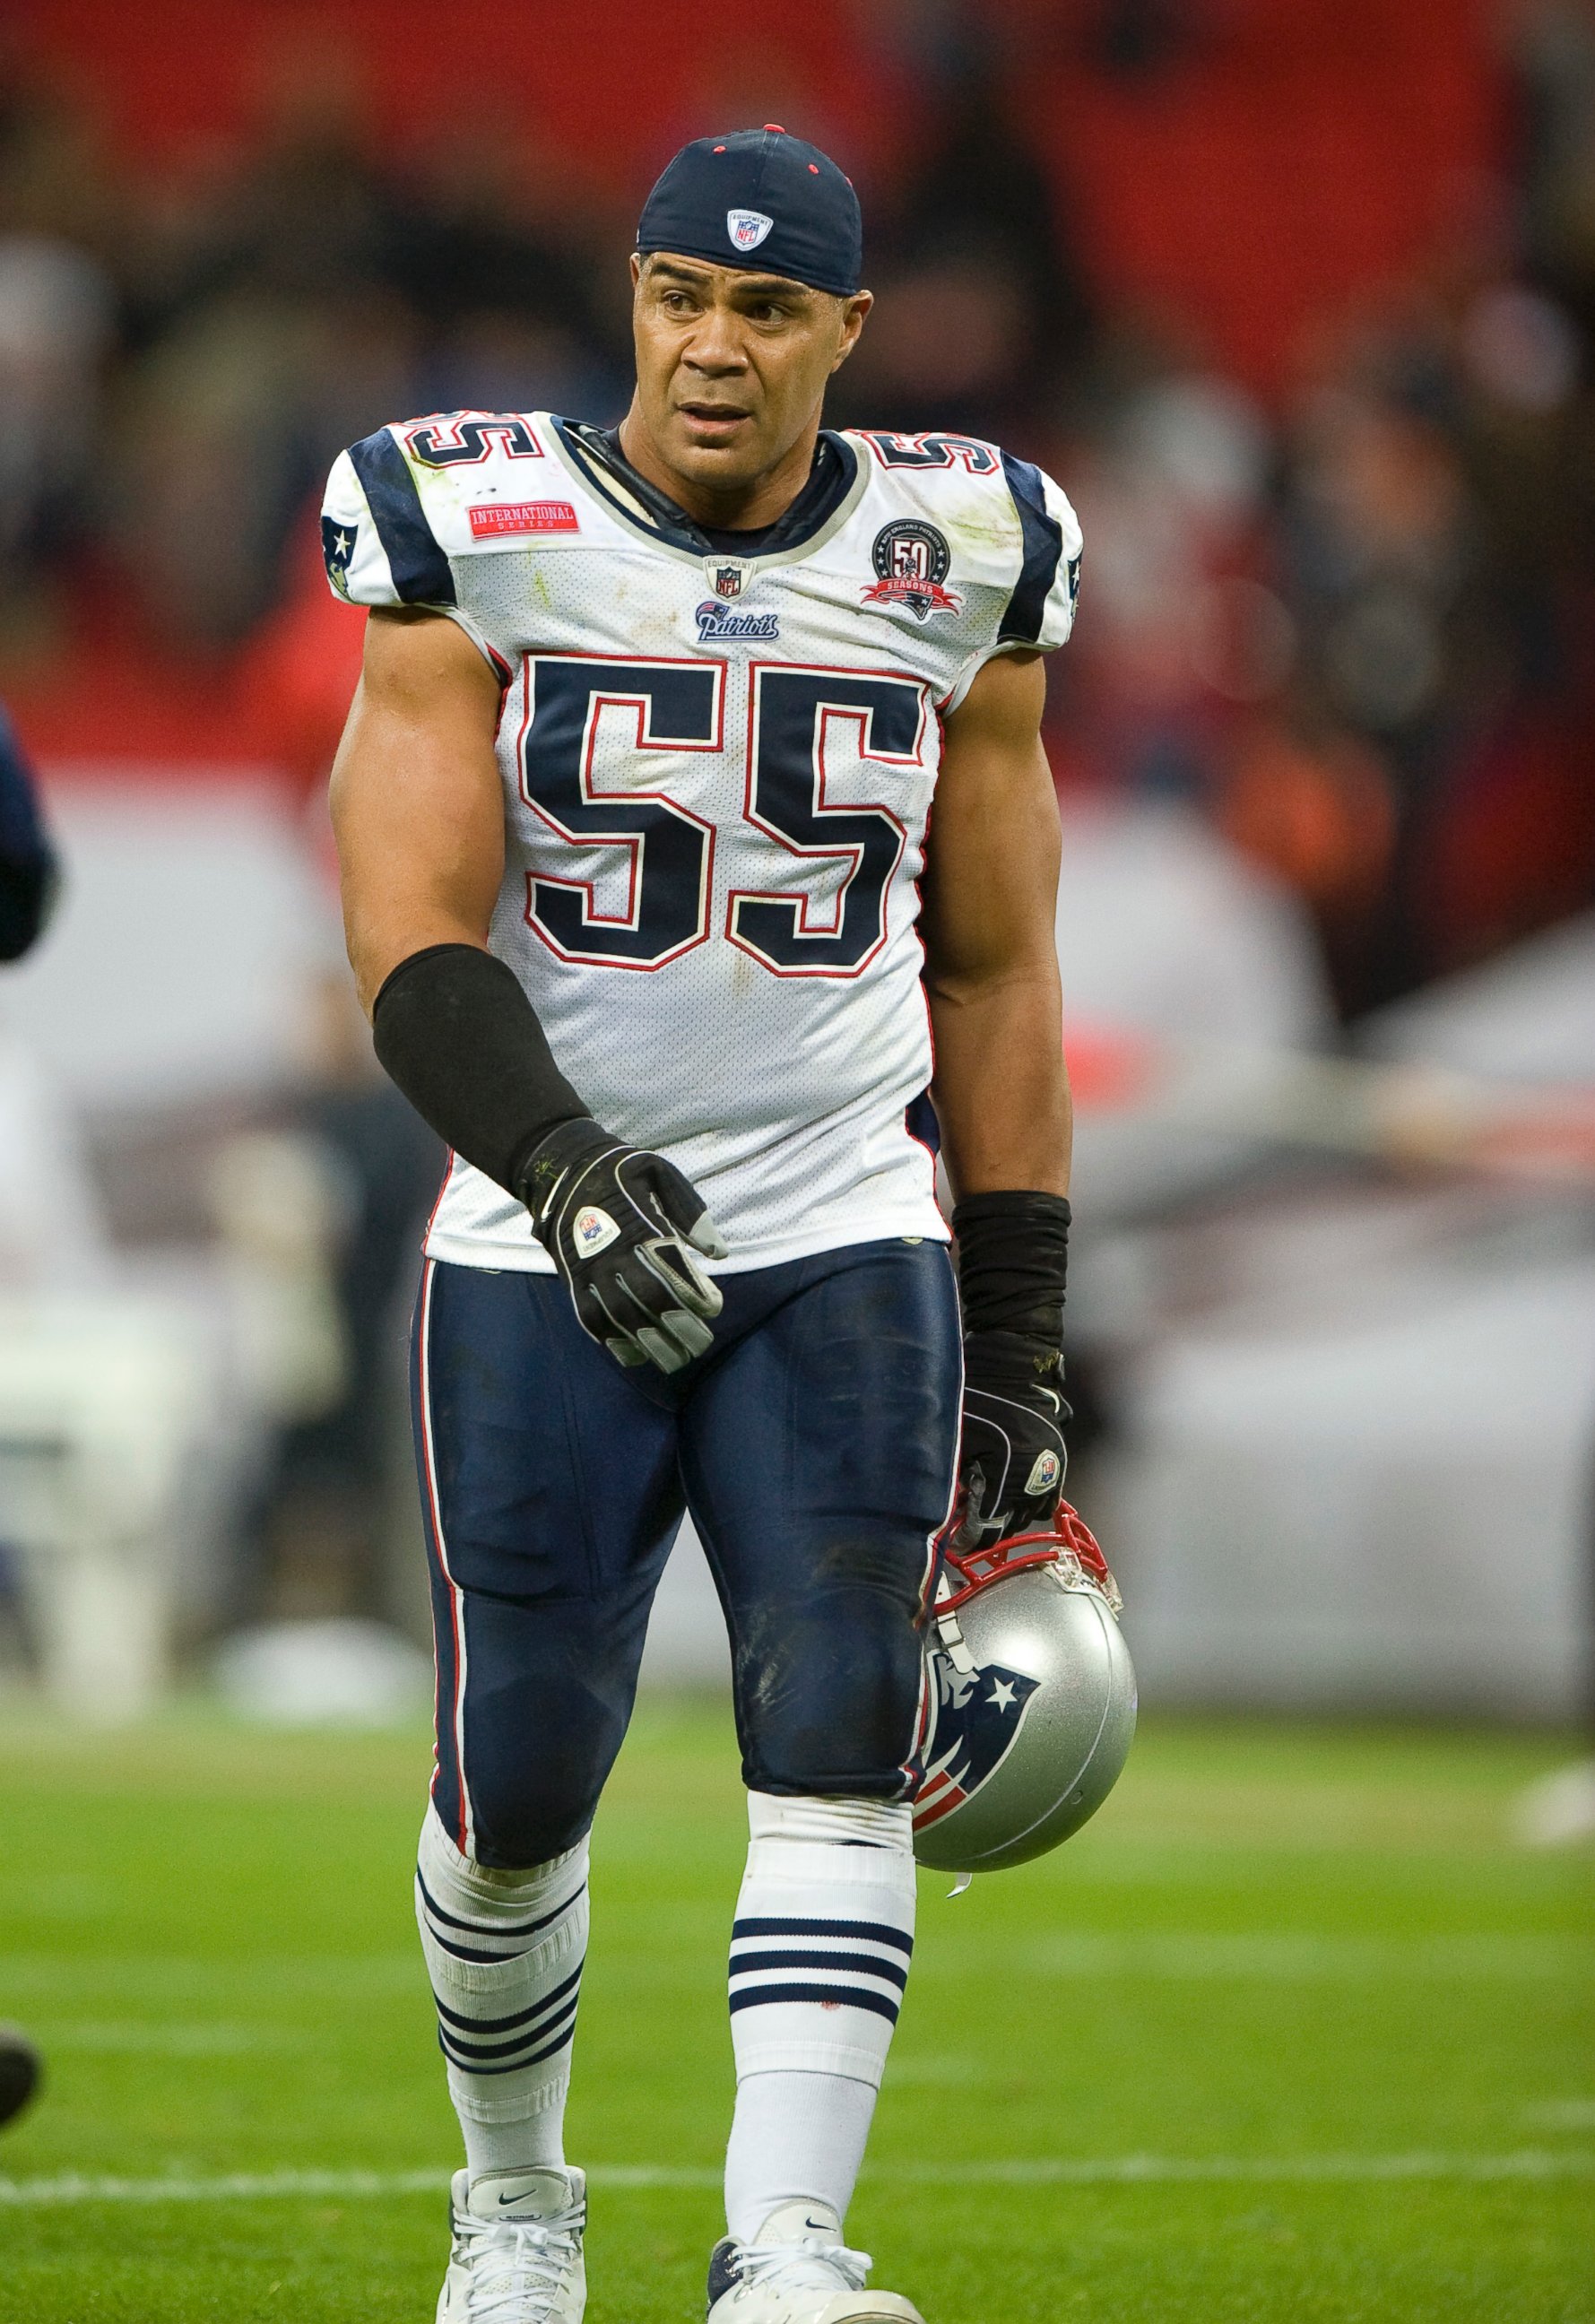 PHOTO: Junior Seau, linebacker of the New England Patriots, is pictured Oct. 25, 2009. 